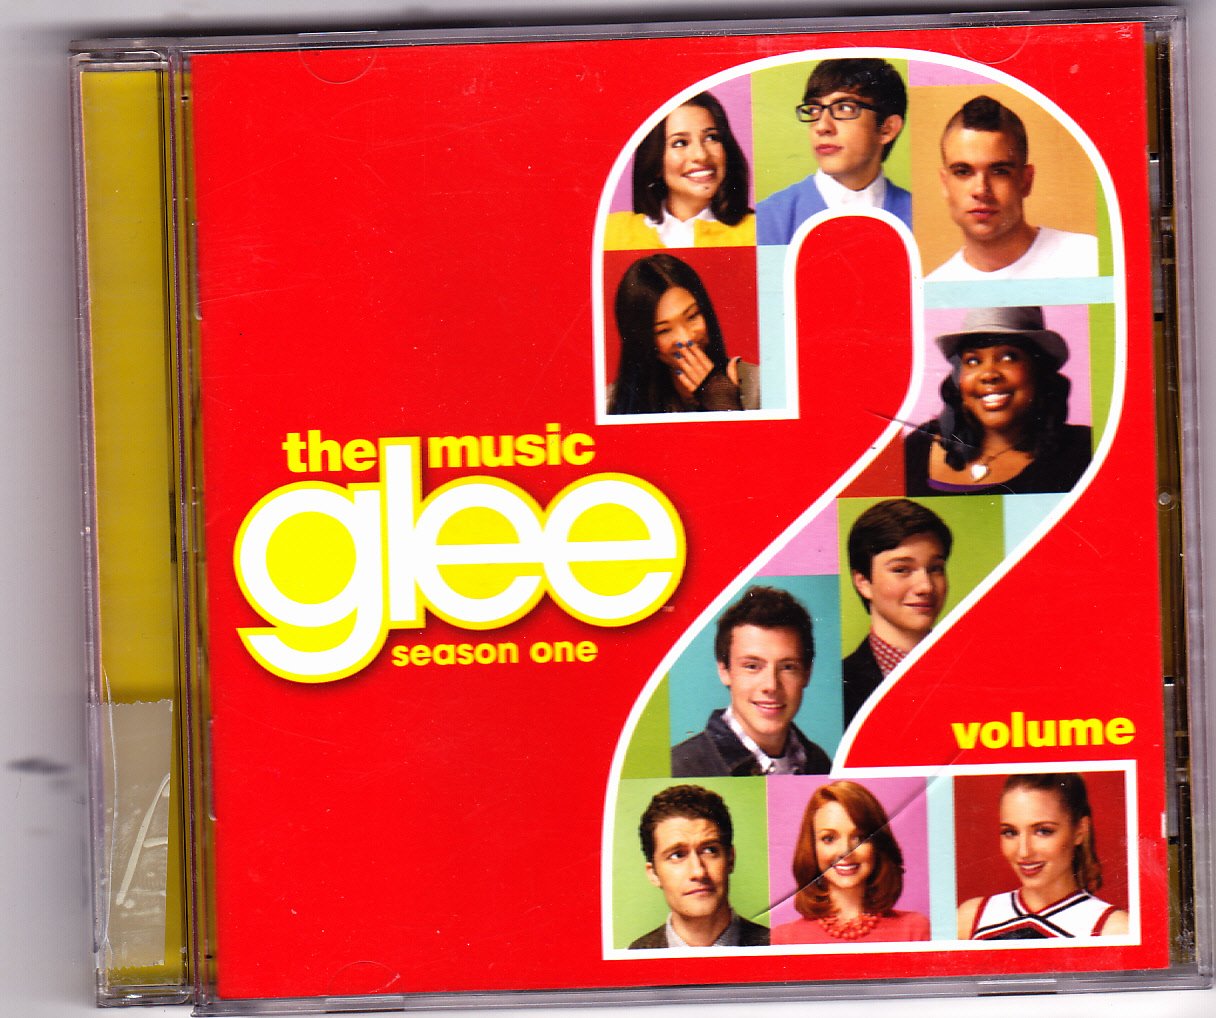 Glee - The Music, Vol. 2 by Original Soundtrack CD 2009 - Very Good